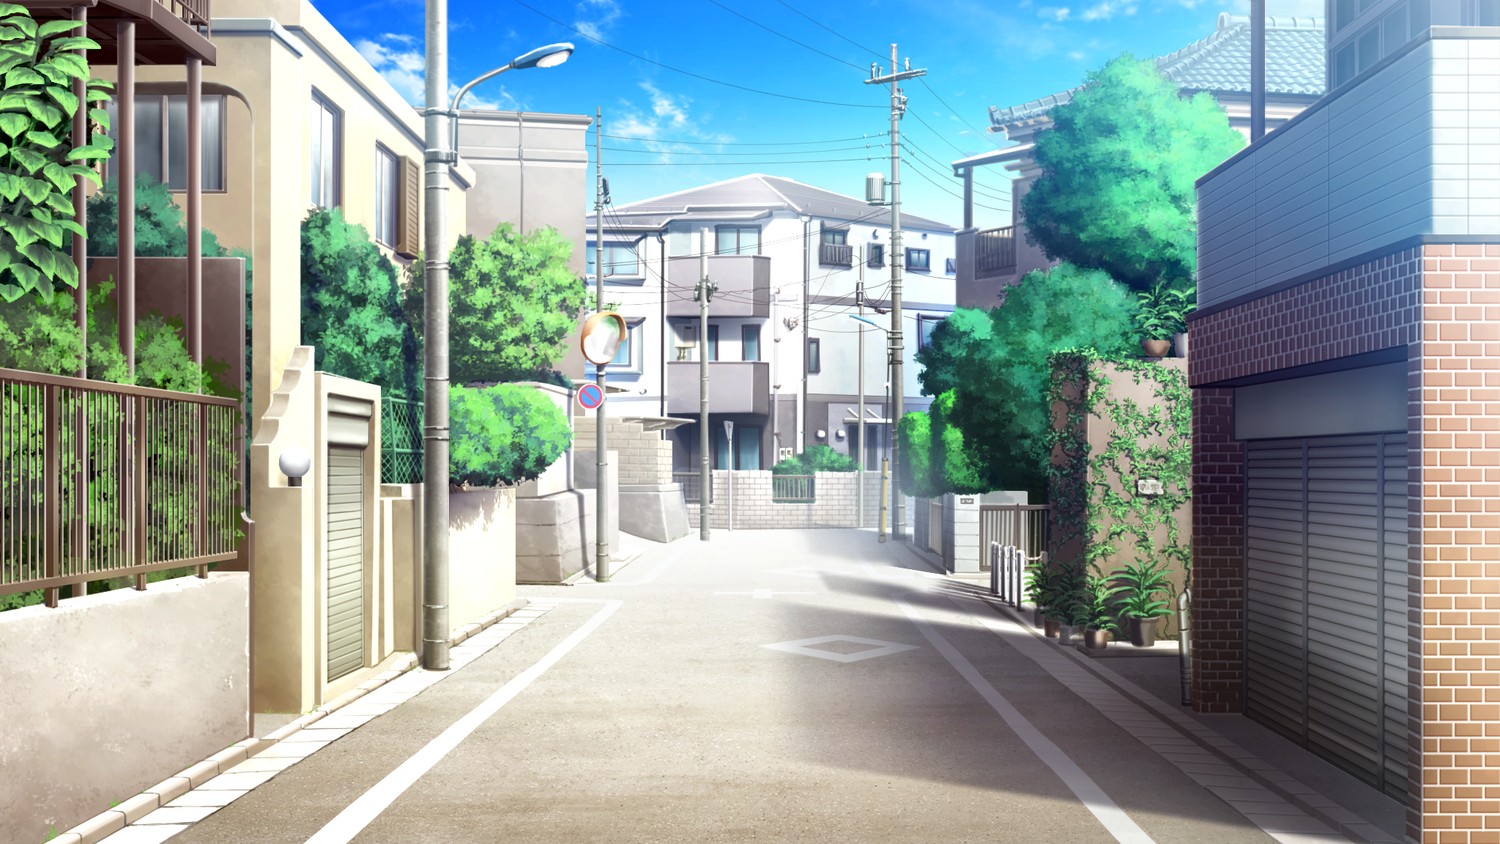 landscape, city, street, cityscape, architecture, anime, road, town, Sekirei, estate, alley, home, apartment, condominium, suburb, facade, lane, human settlement, neighbourhood, residential area, courtyard, property, real estate High quality walls